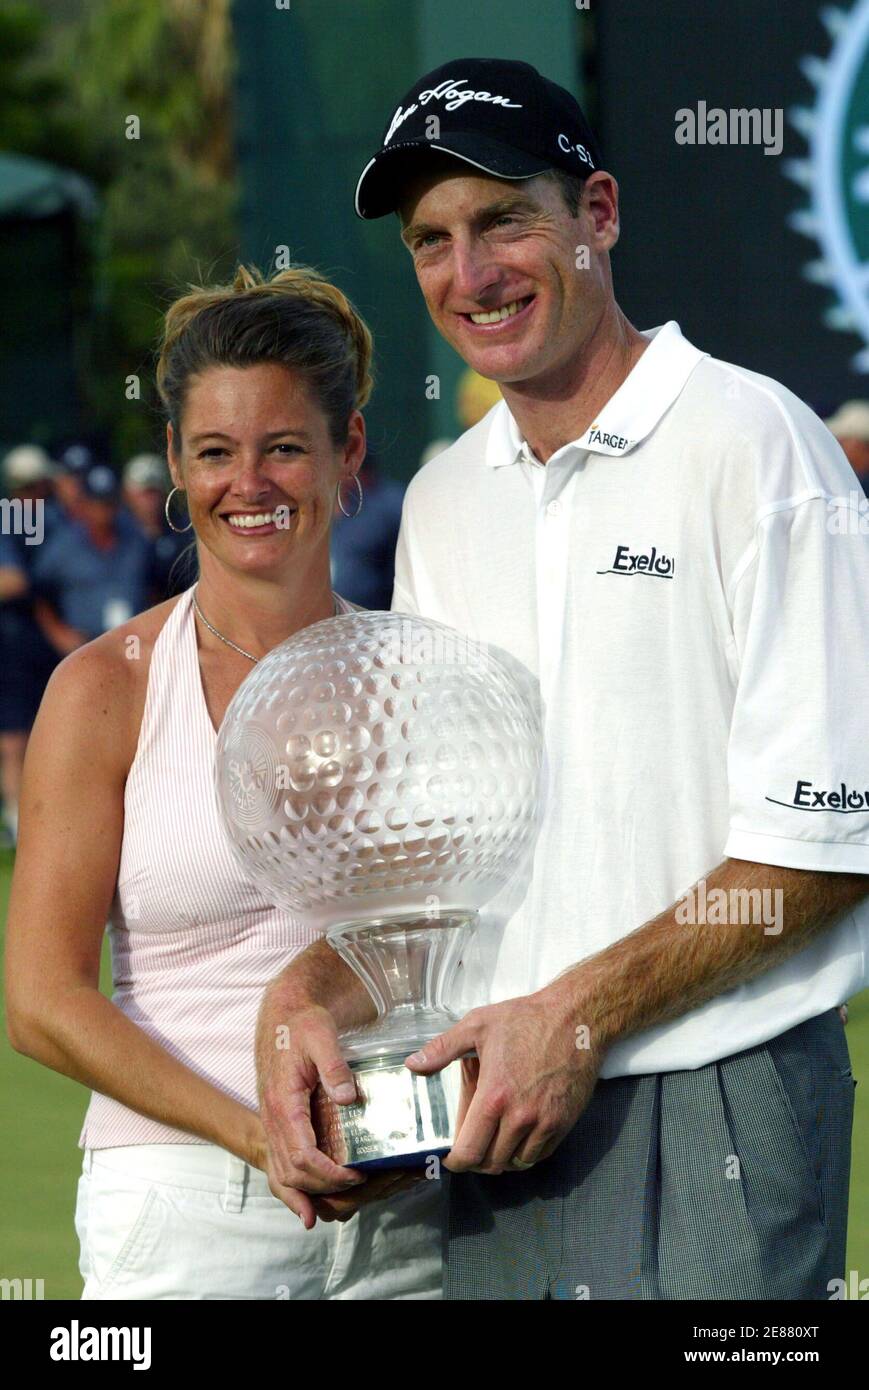 Jim Furyk of the U.S. and his wife Tabatha (L) hold a trophy after he won the Sun City Golf Challenge in Sun City, west of Johannesburg, in South Africa December 4, 2005. Furyk chipped in on the second extra hole of a sudden-death playoff to win the 25th Sun City Golf Challenge on Sunday. Furyk's birdie from 15-feet from the back of the par-four 18th green beat off Briton Darren Clarke and Australia's Adam Scott for the $1.2 million first prize. REUTERS/Juda Ngwenya Stock Photo